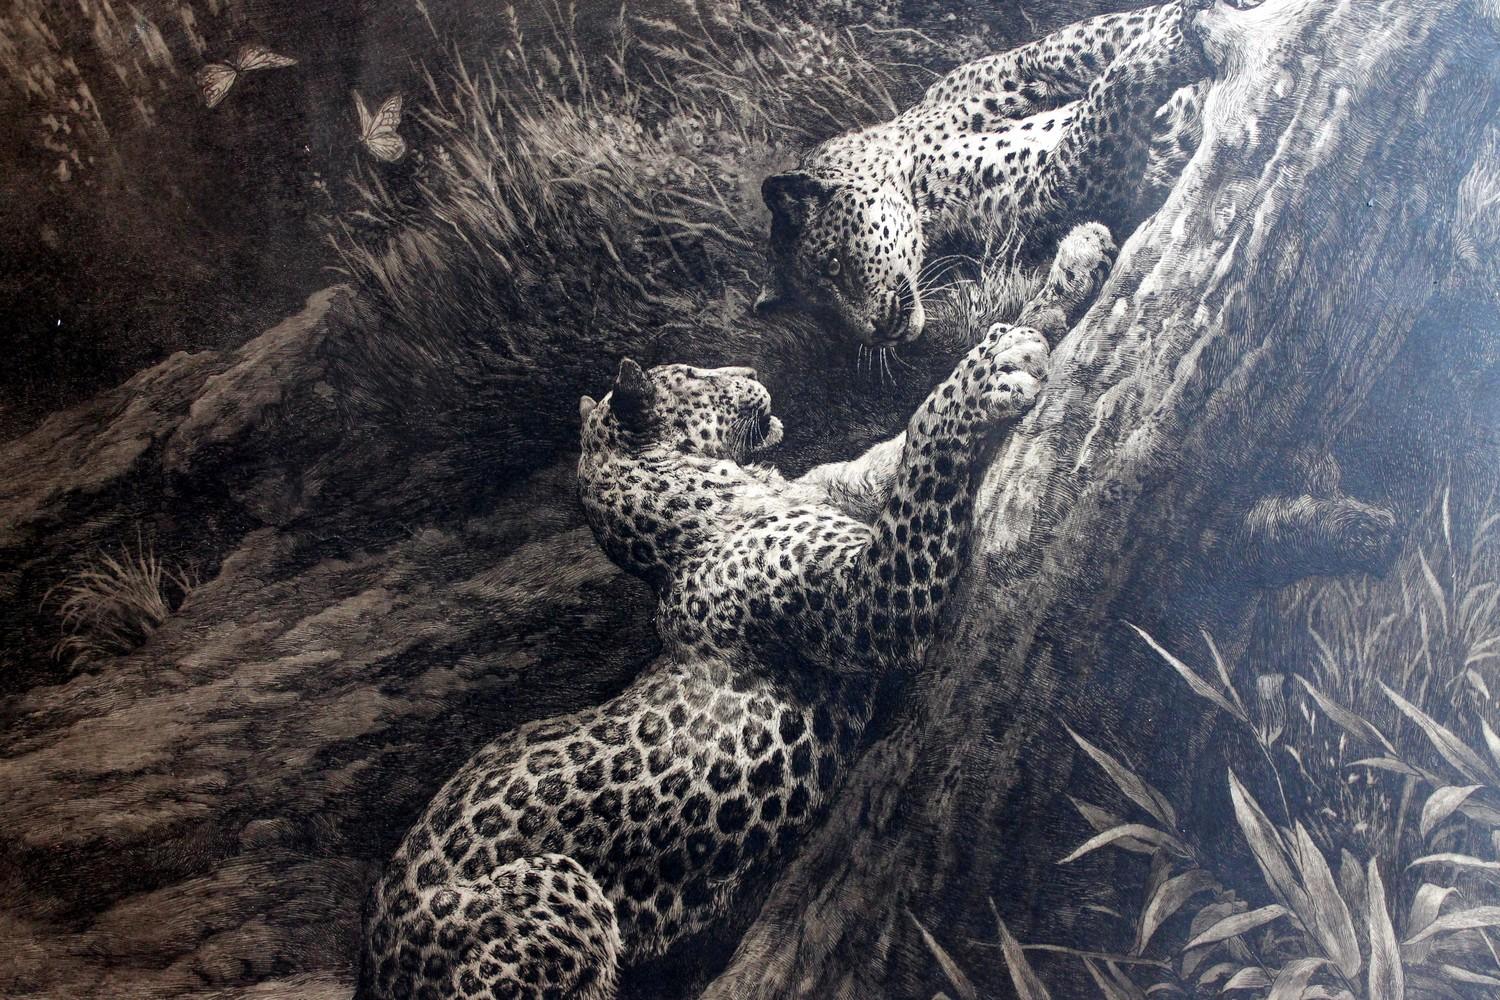 Antique Black and White Etching with Leopards Playing  - Gray Animal Print by Herbert Dicksee